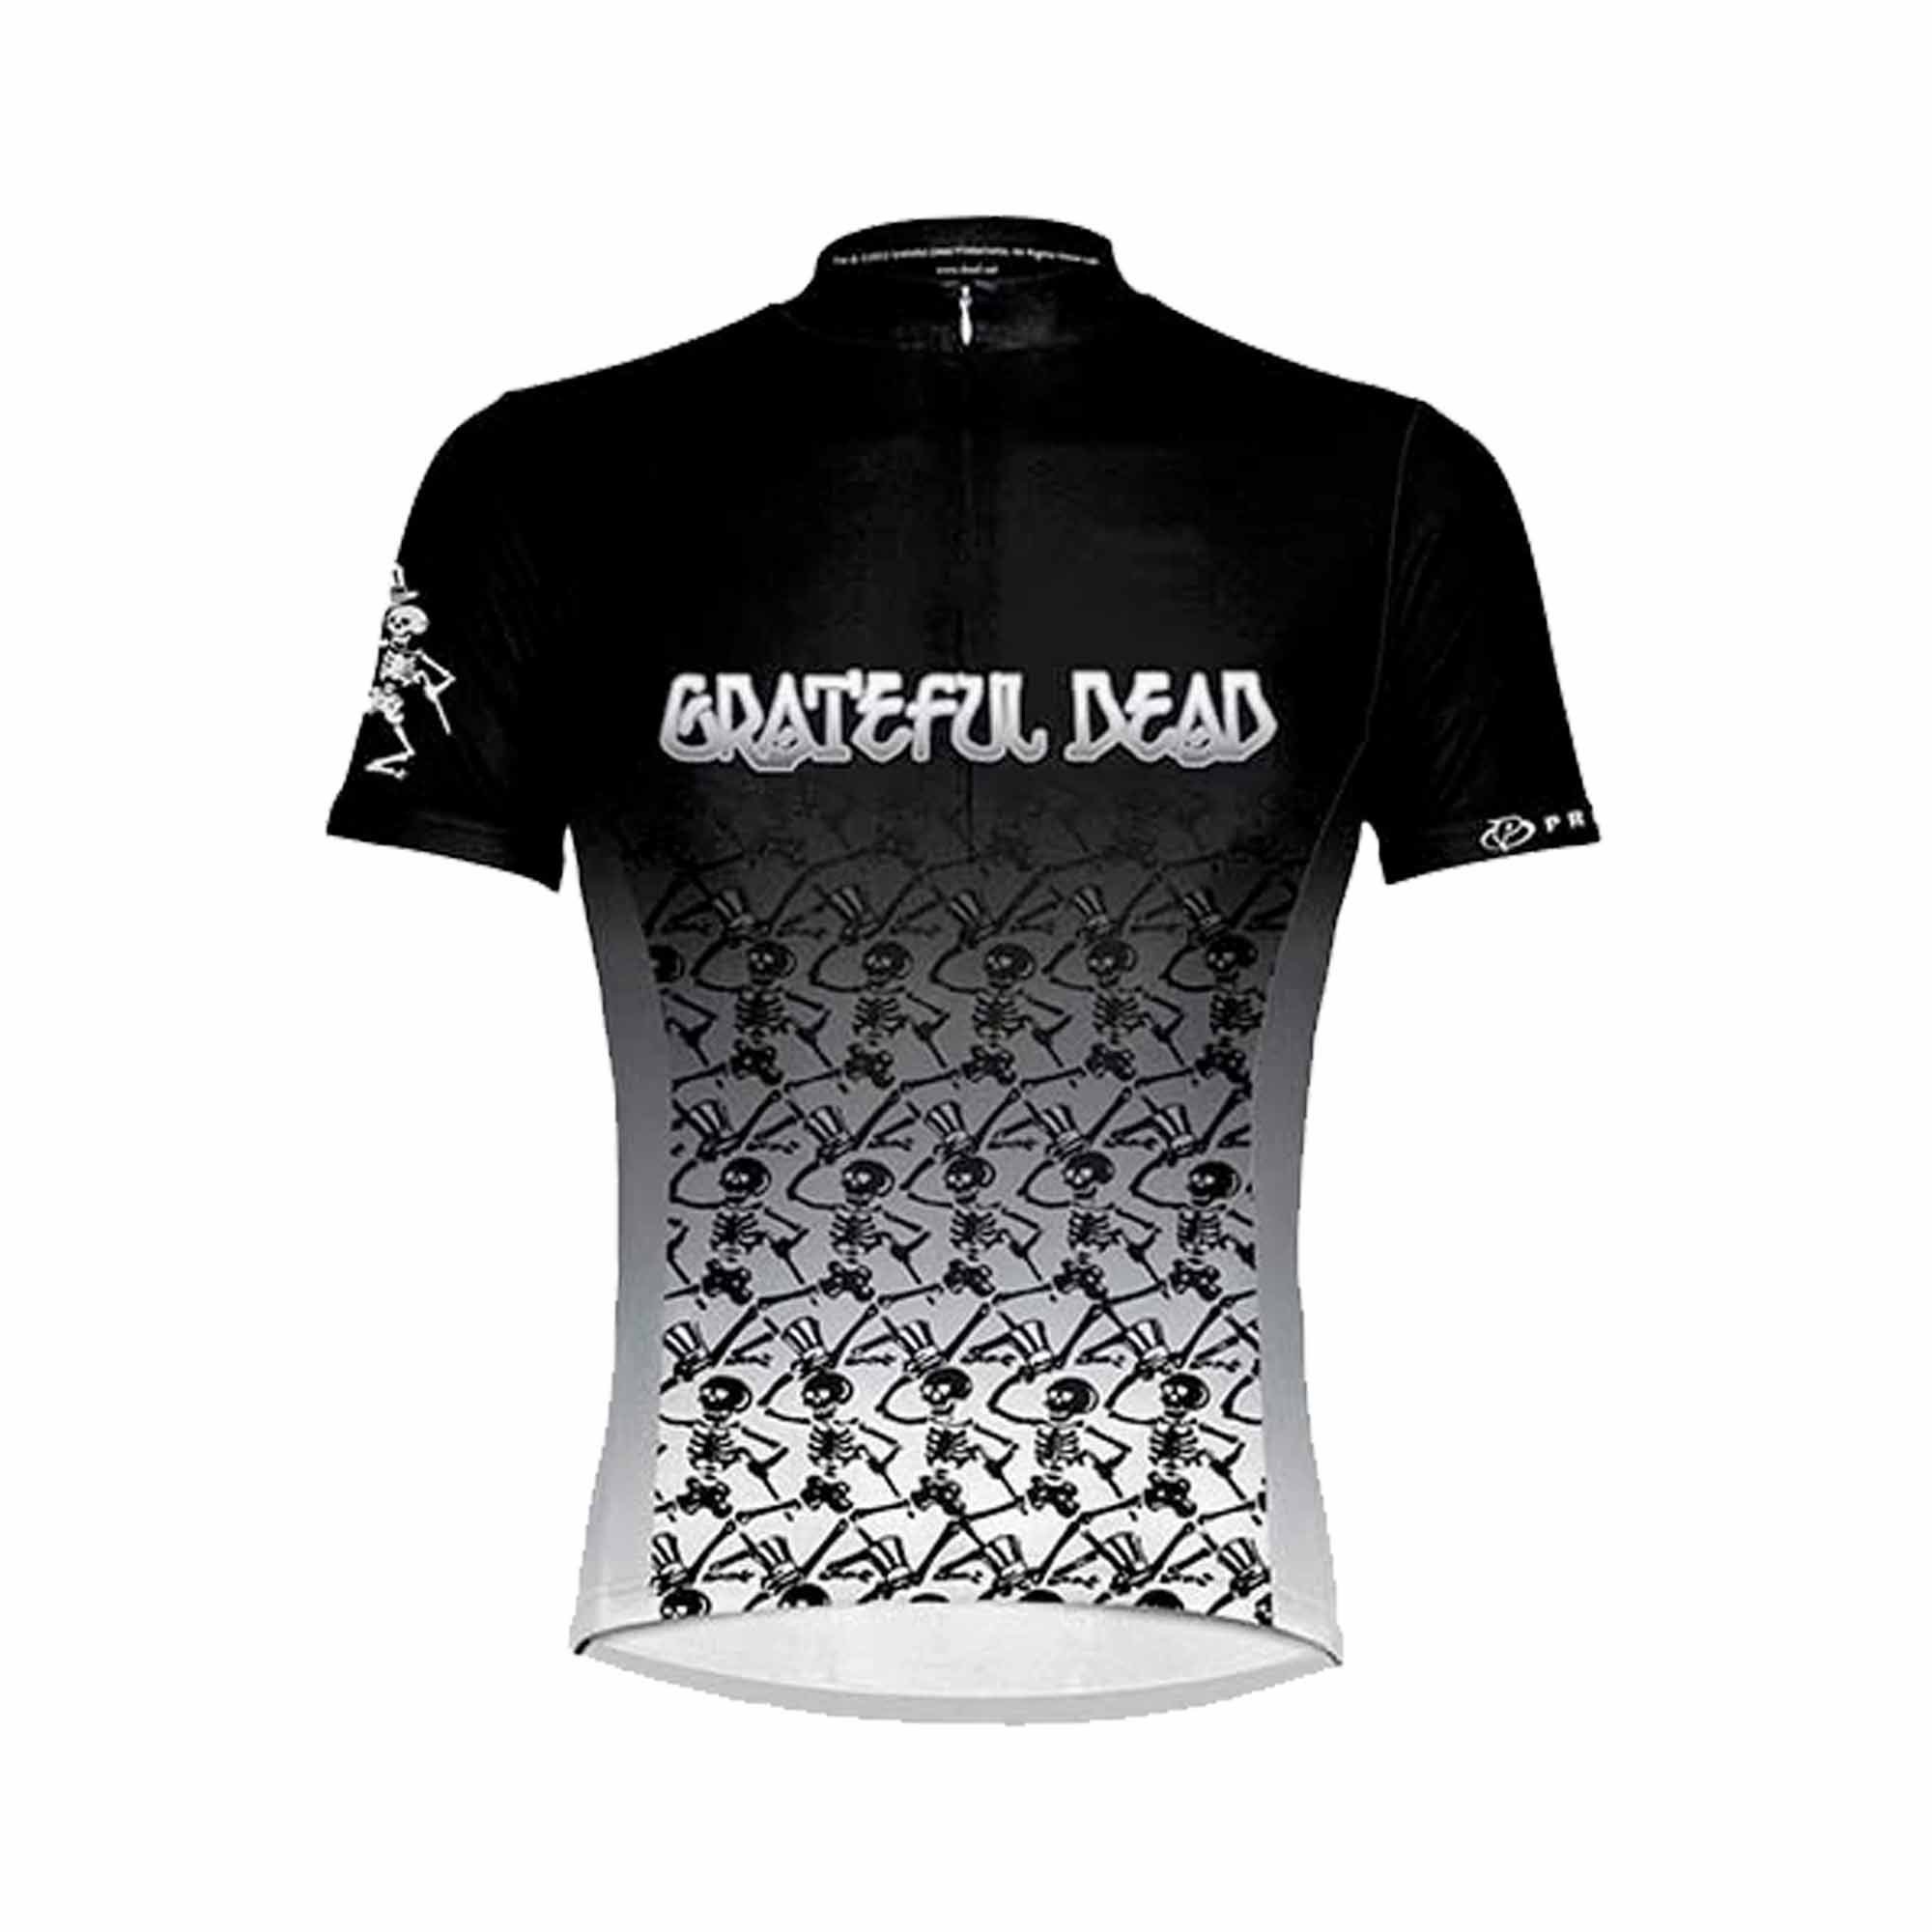  Primal Wear Men's Grateful Dead Team Steal Your Face Cycling  Jersey, Blue Black, Small : Clothing, Shoes & Jewelry